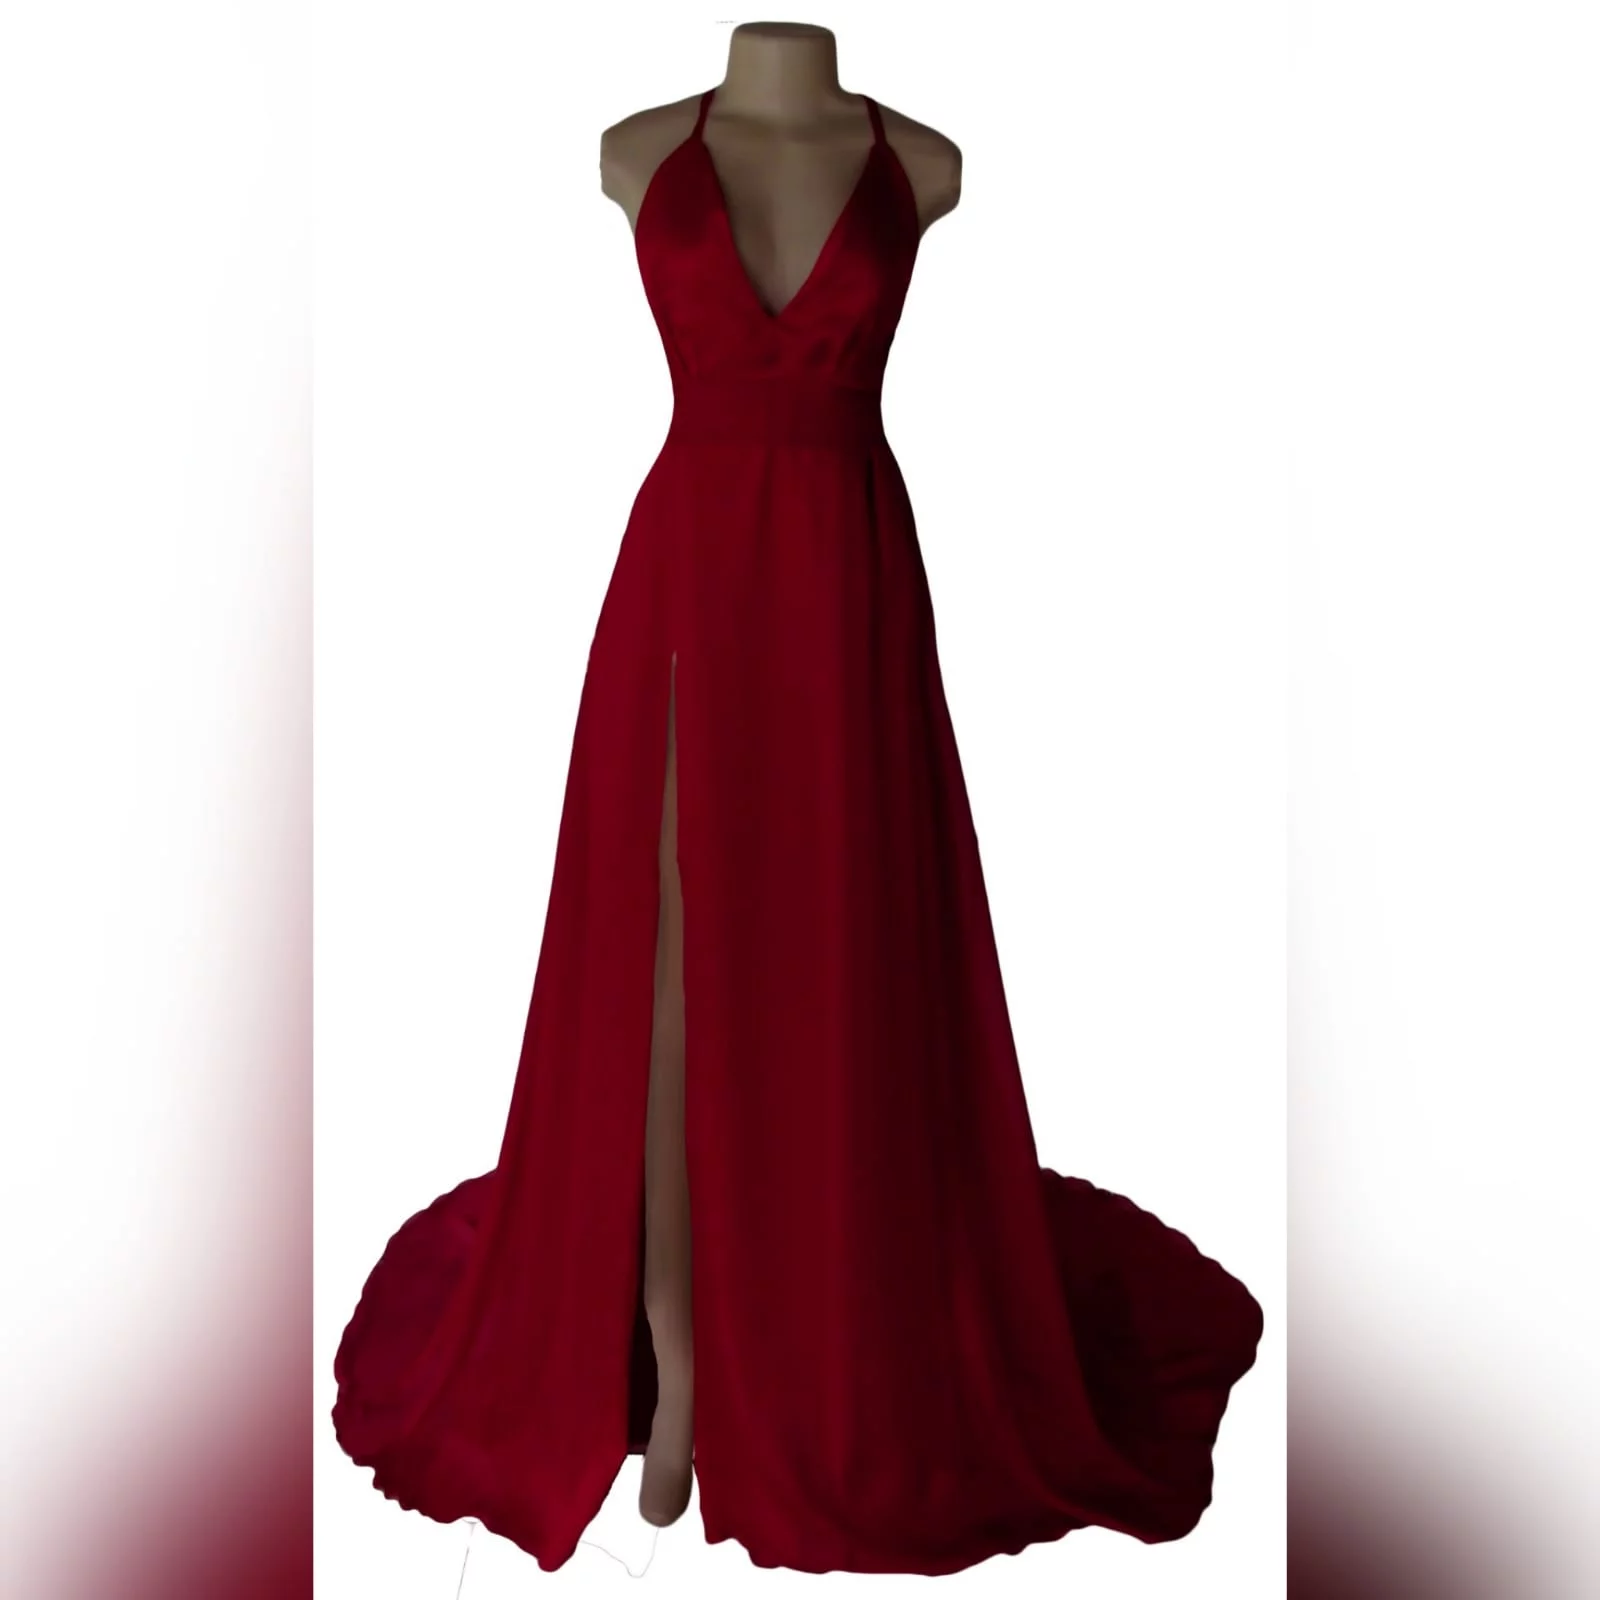 Long red flowy formal dress 2 long red flowy formal dress, with a low v neckline, low open back with crossed thin shoulder straps. Wide waist belt, high slit and a train. A design suitable for various occasions, made per measurements any colour you want.